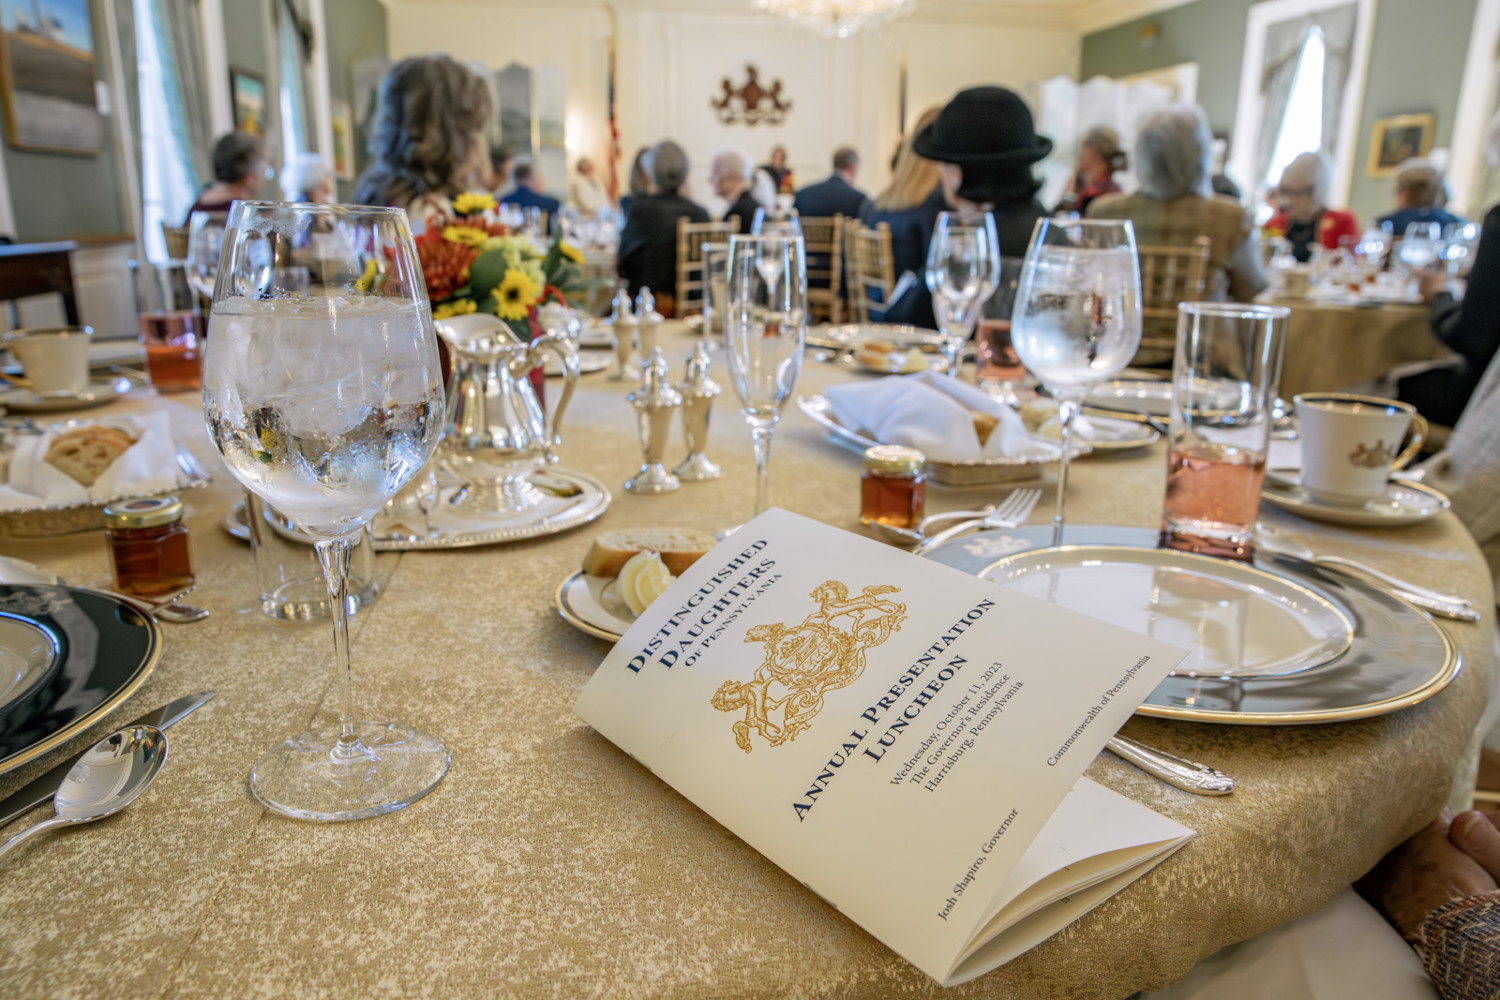 Place settings at the Distinguished Daughters of Pennsylvania luncheon. The event program is seen in the foreground.